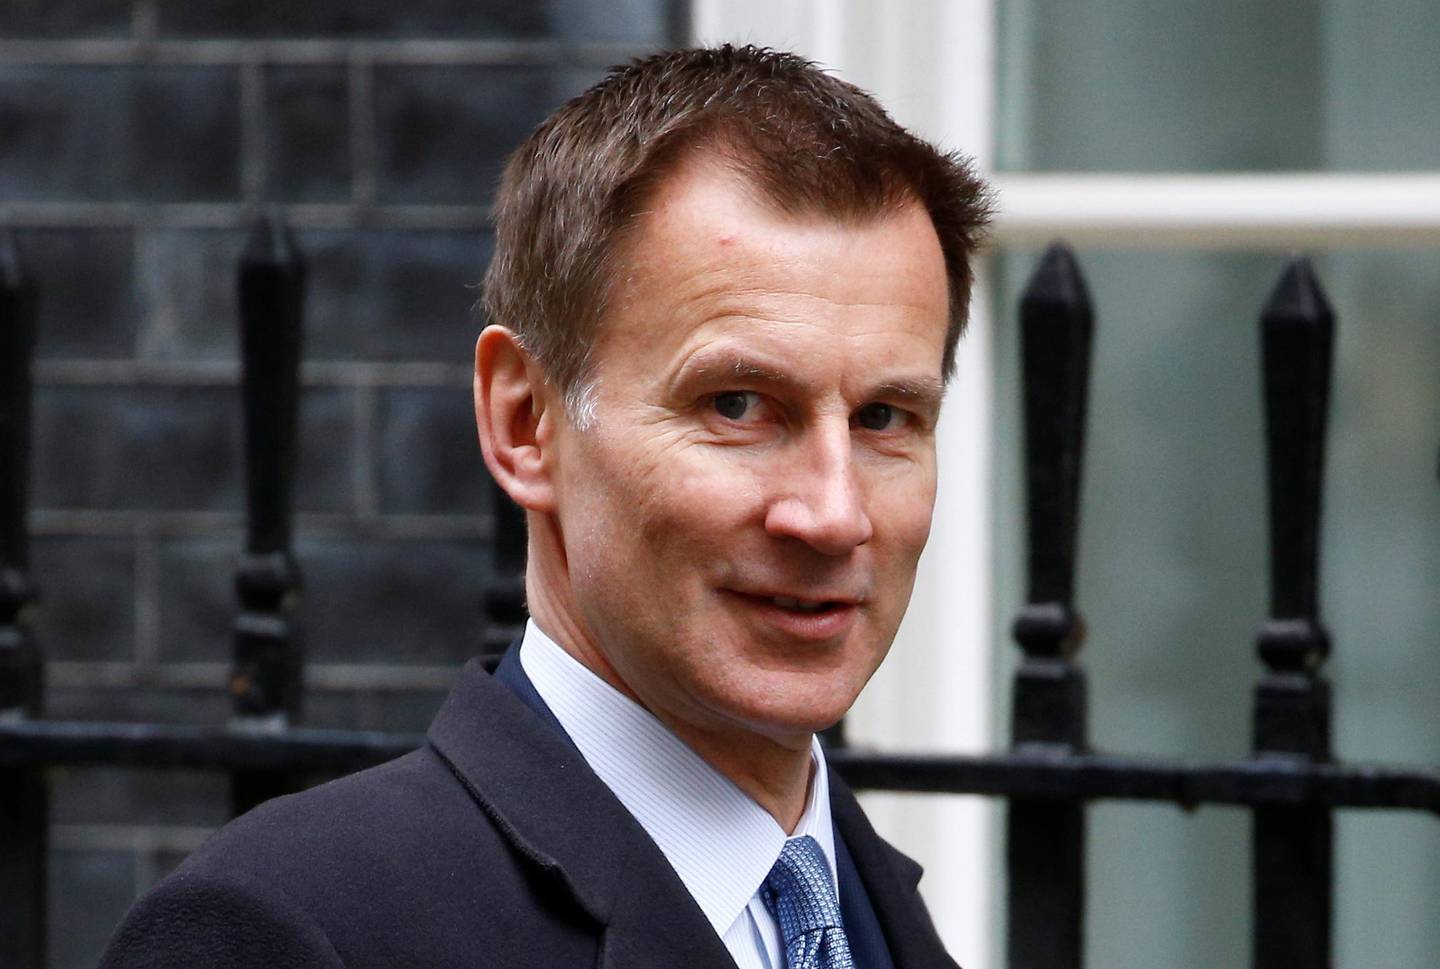 Britain's Foreign Secretary Jeremy Hunt walks outside Downing Street in London, Britain March 19, 2019. REUTERS/Henry Nicholls